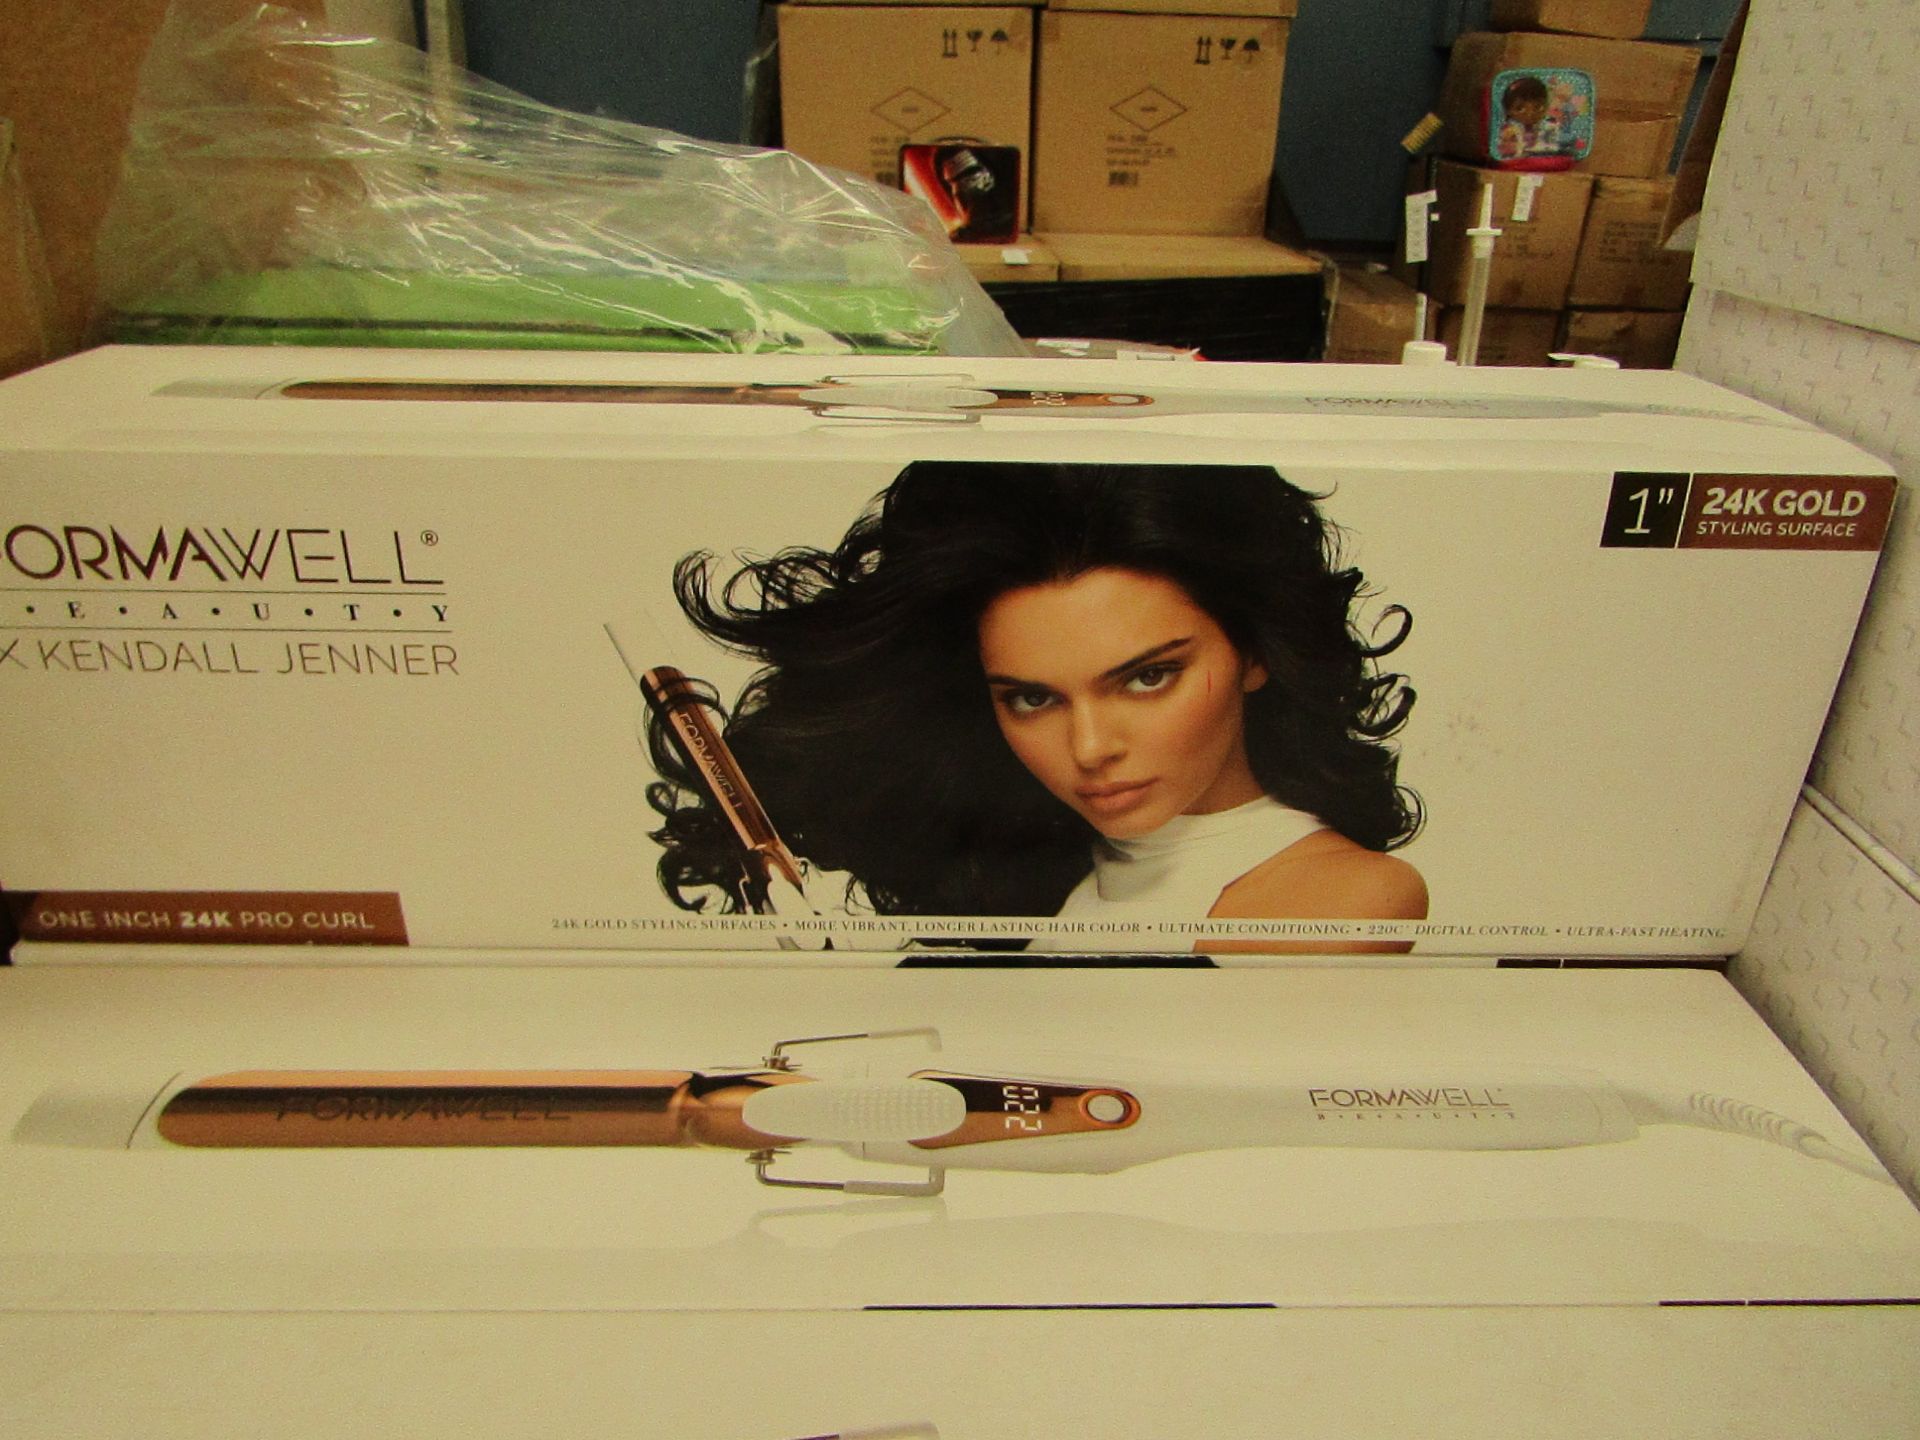 | 1x | FORMAWELL BEAUTY KENDAL JENNER ONE INCH 24K PRO CURLER | UNTESTED & BOXED | SKU 5060541518407